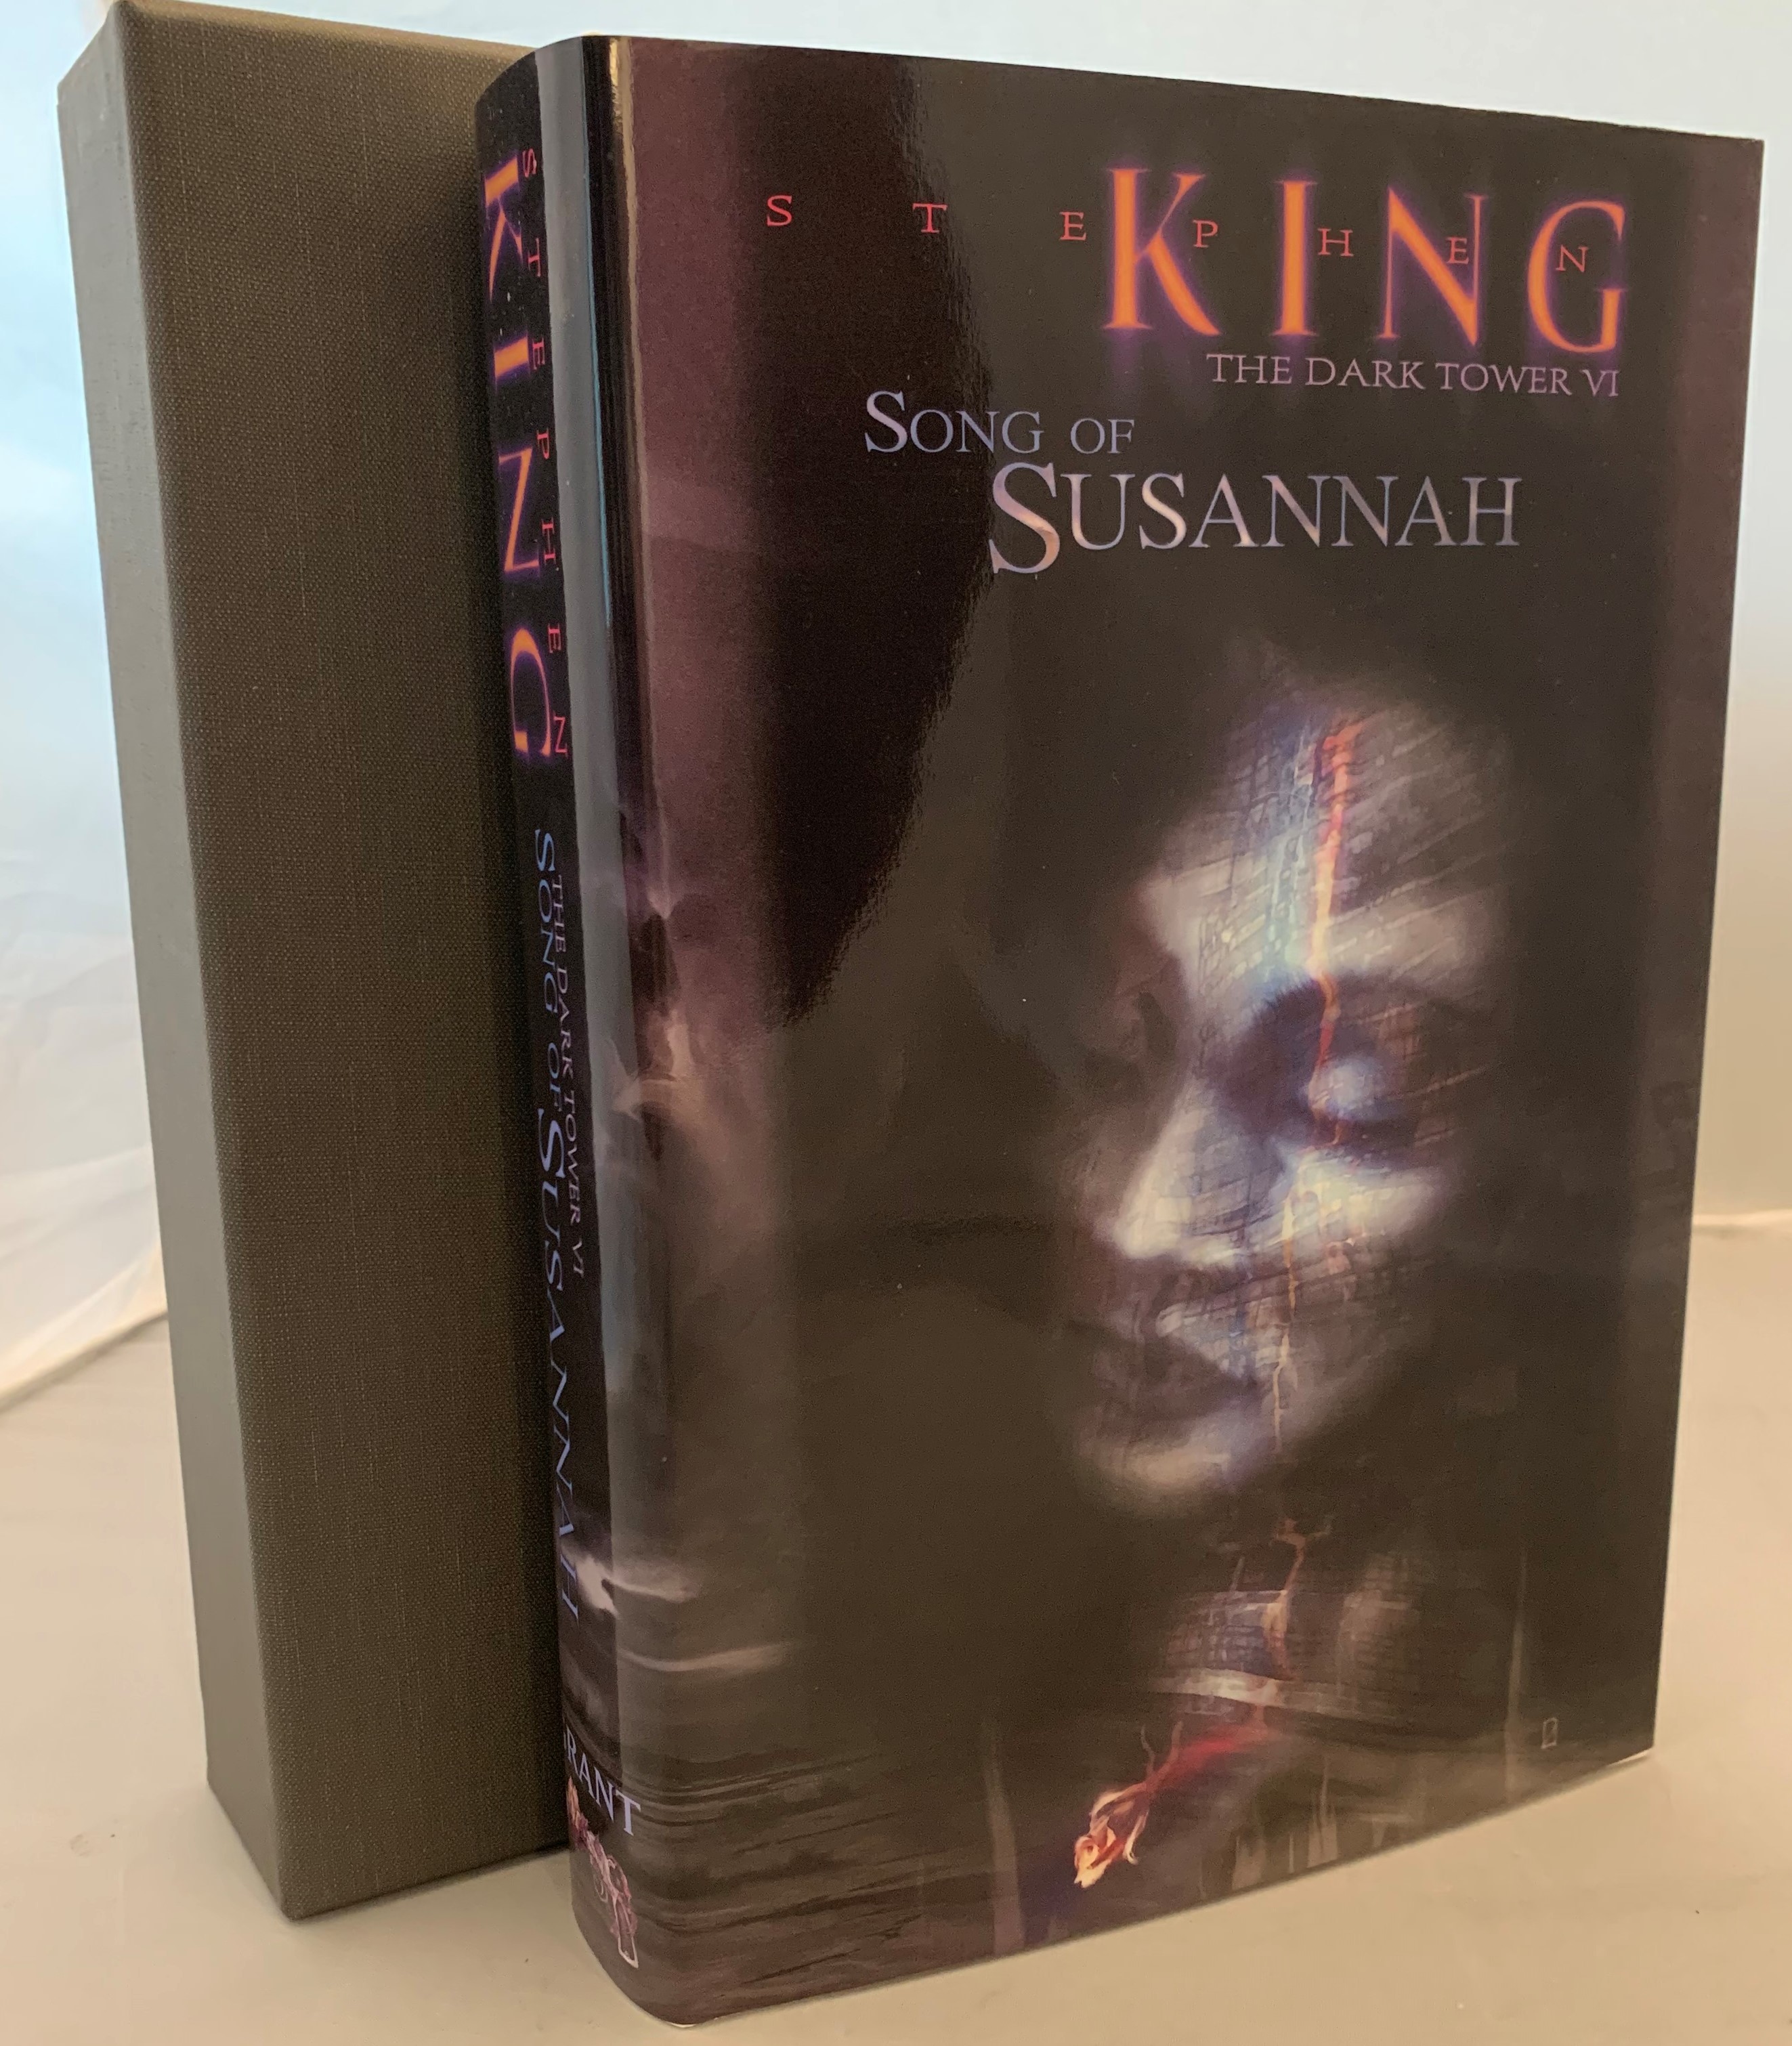 The Dark Tower VI: Song of Susannah - Signed - Stephen King